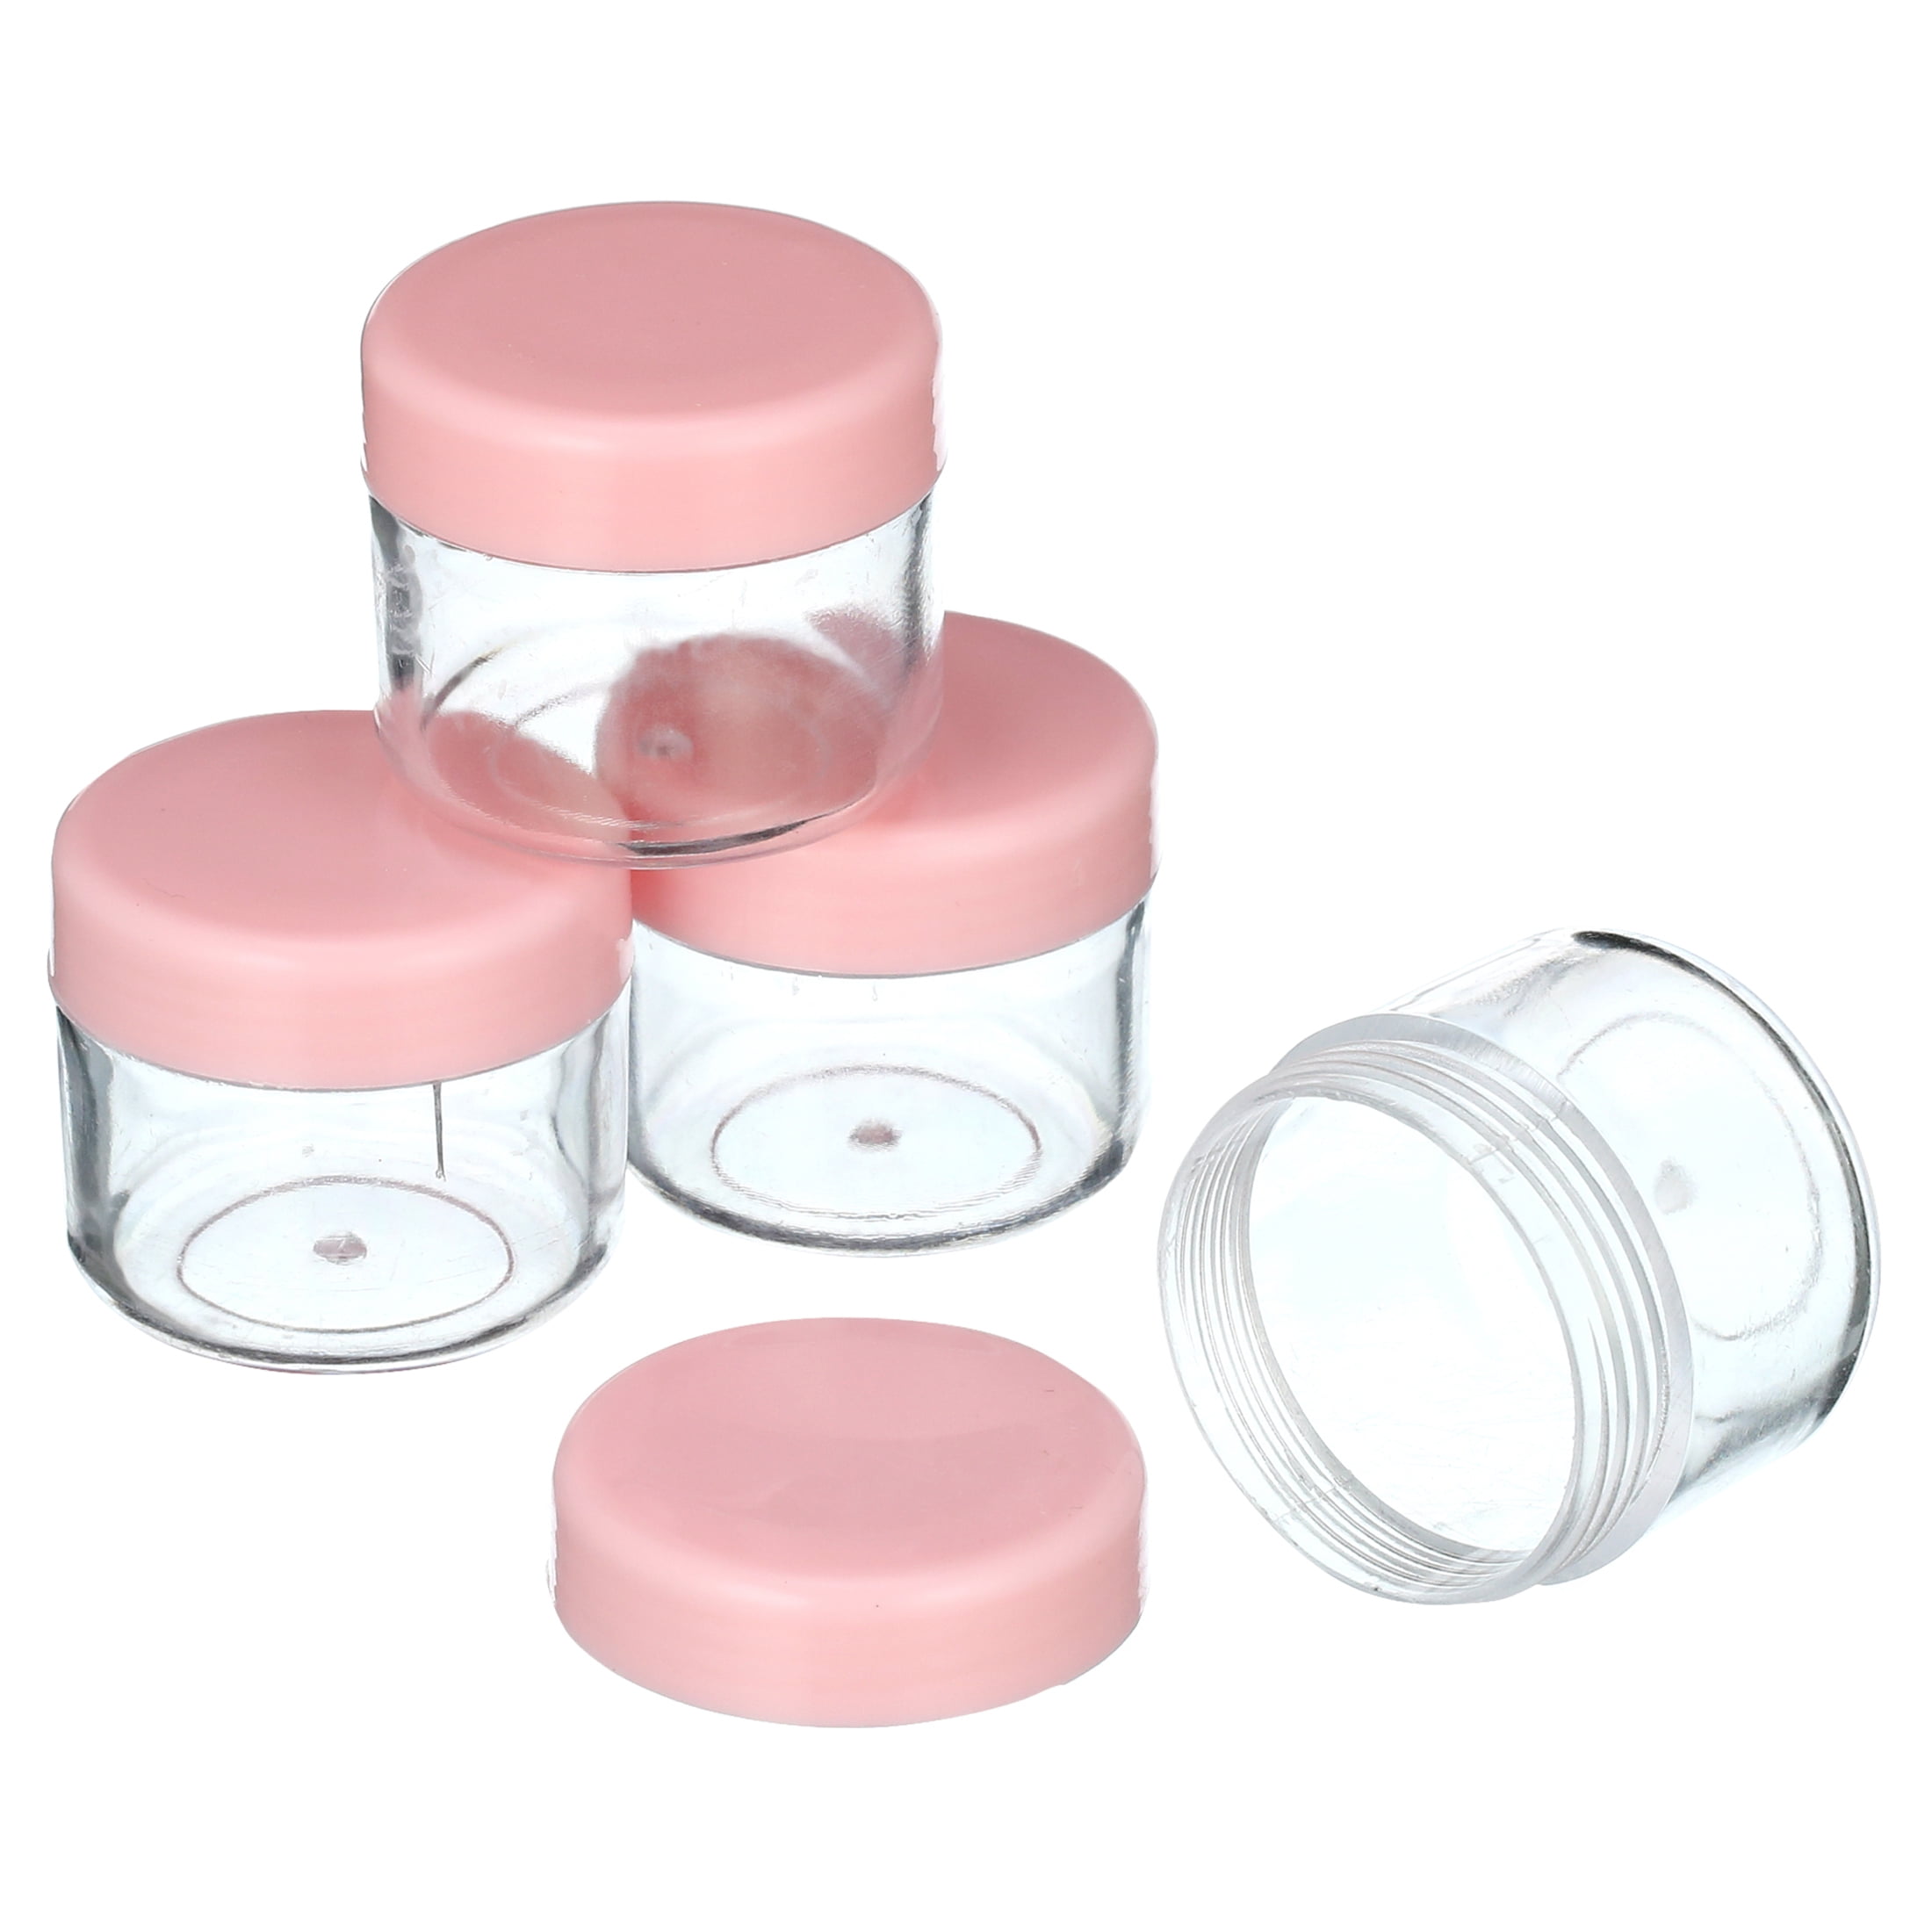 6ml Round Glass Concentrate Jar w/ Silicone Lids - Pink Lids